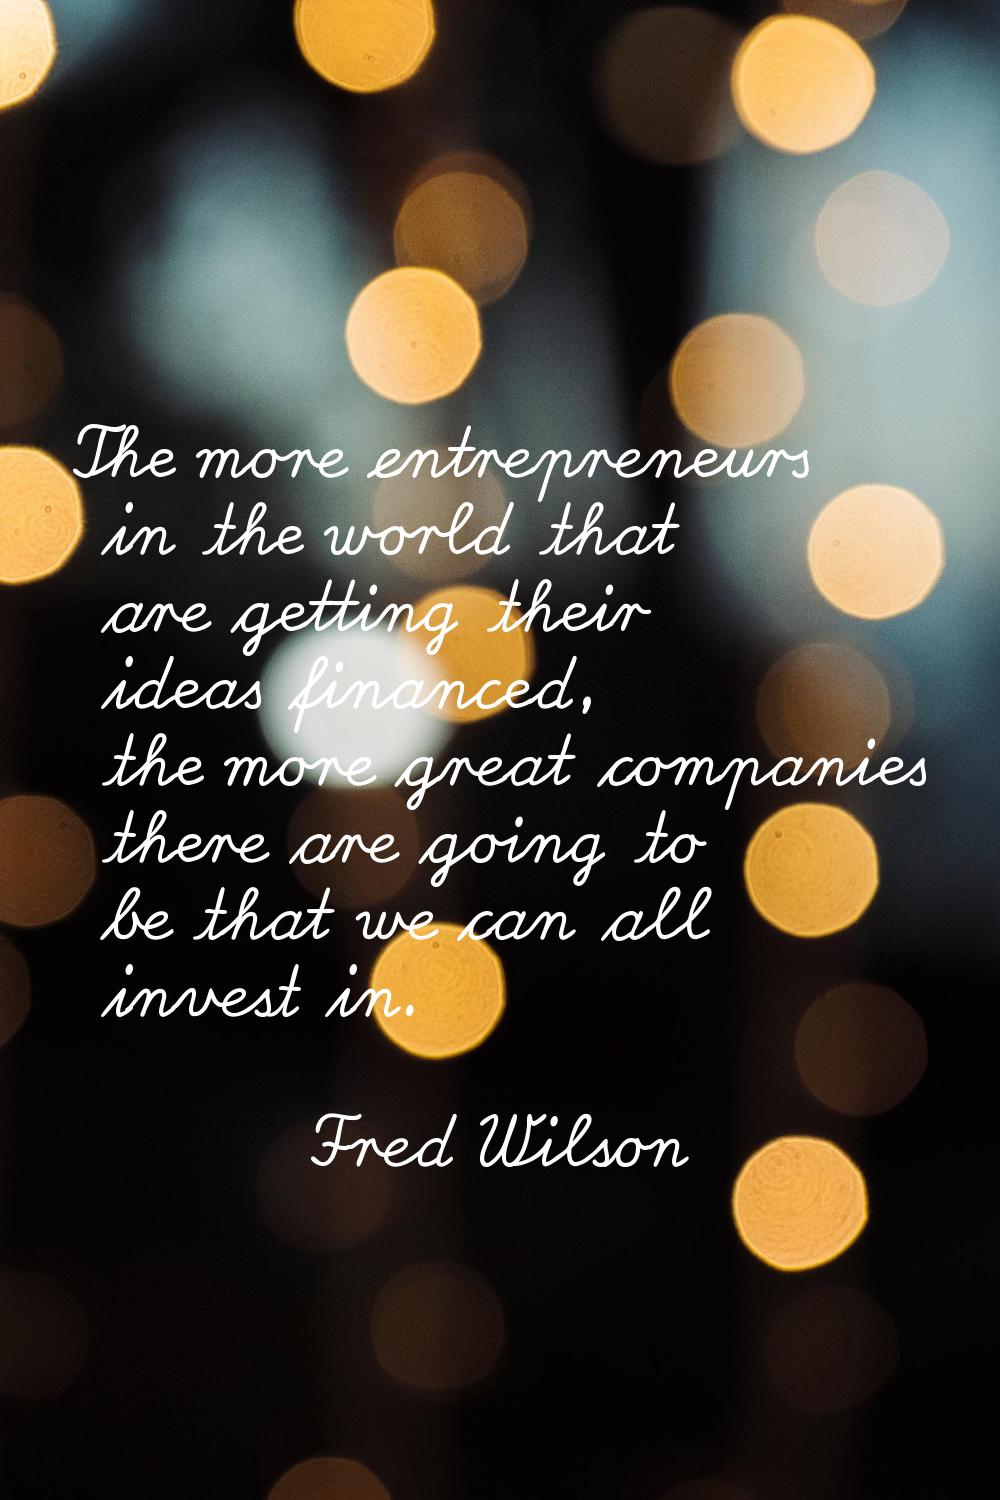 The more entrepreneurs in the world that are getting their ideas financed, the more great companies